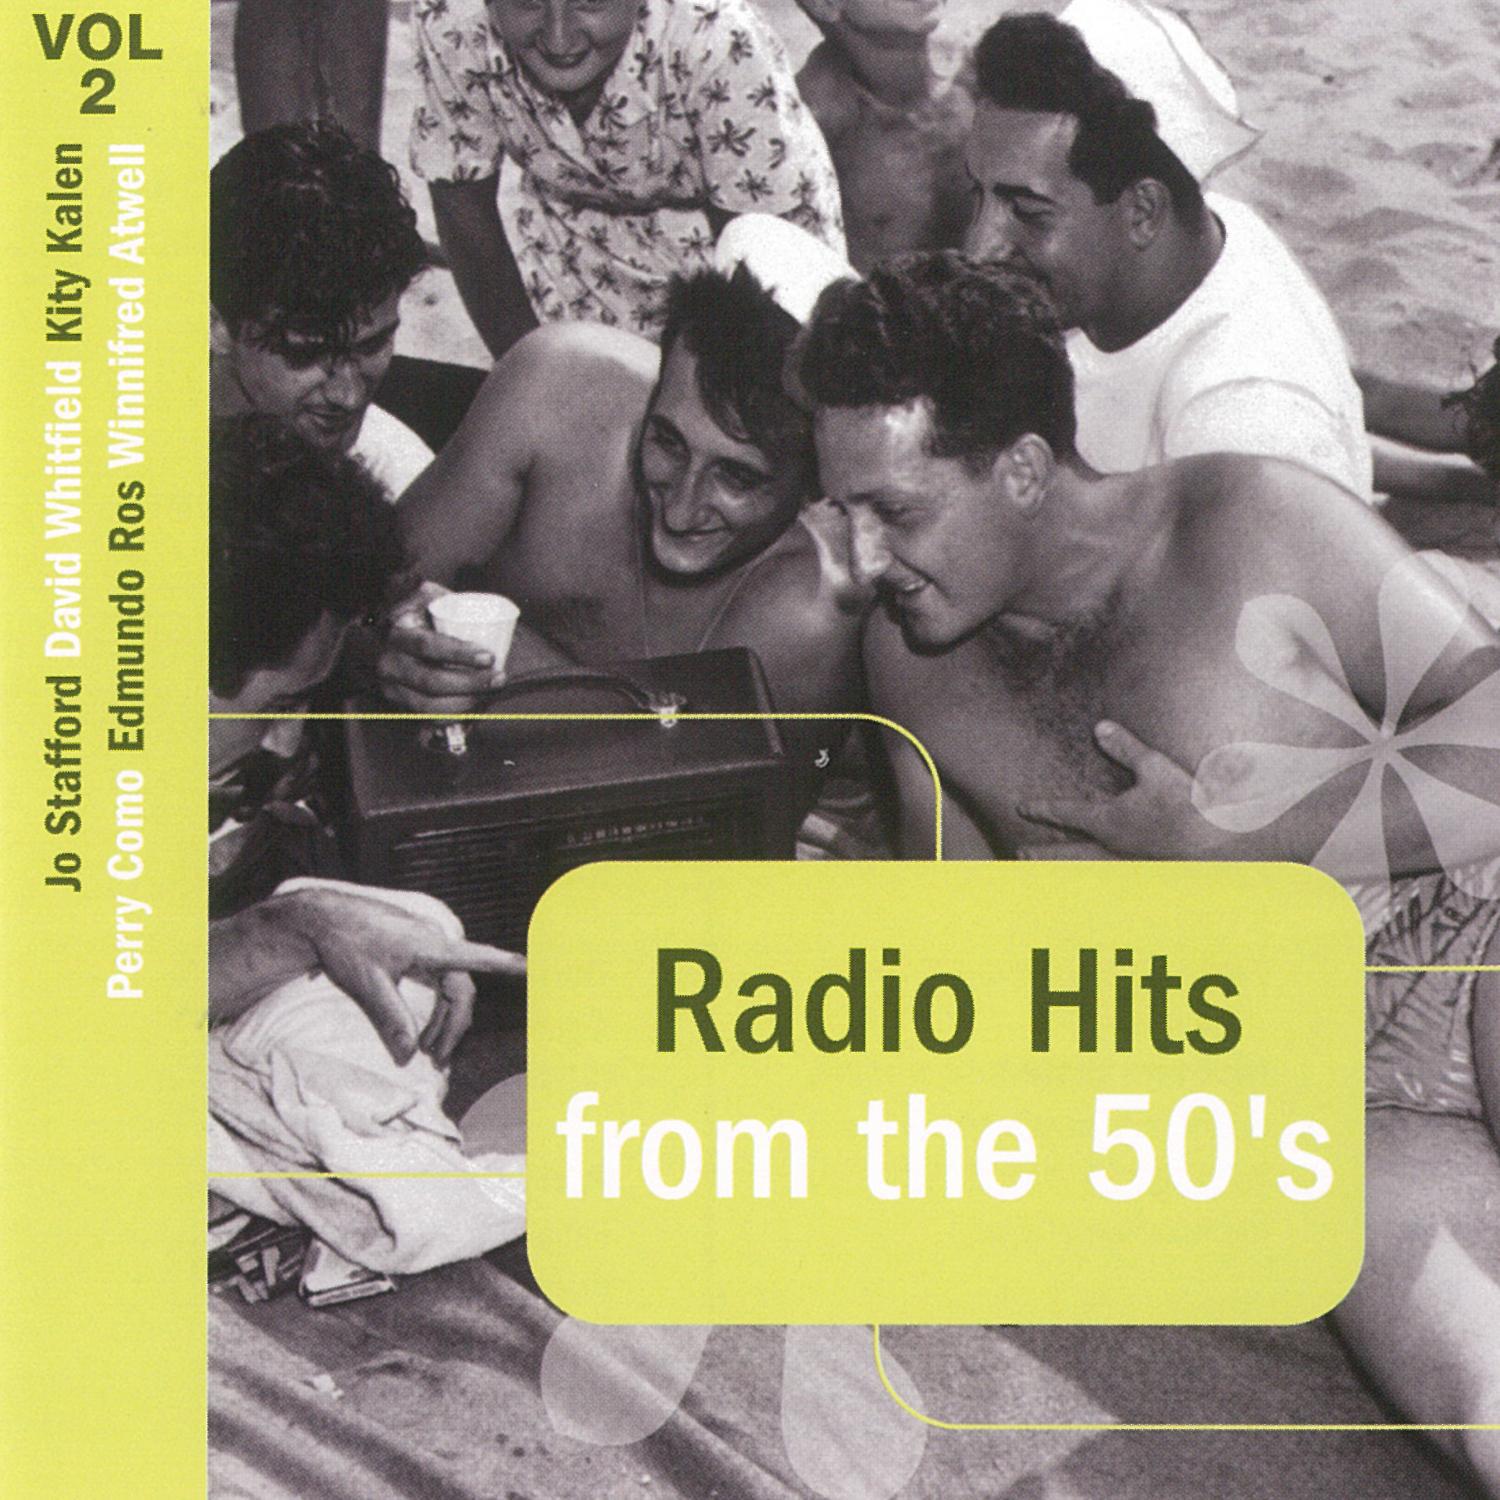 Radio Hits from the 50's, Vol. 2专辑